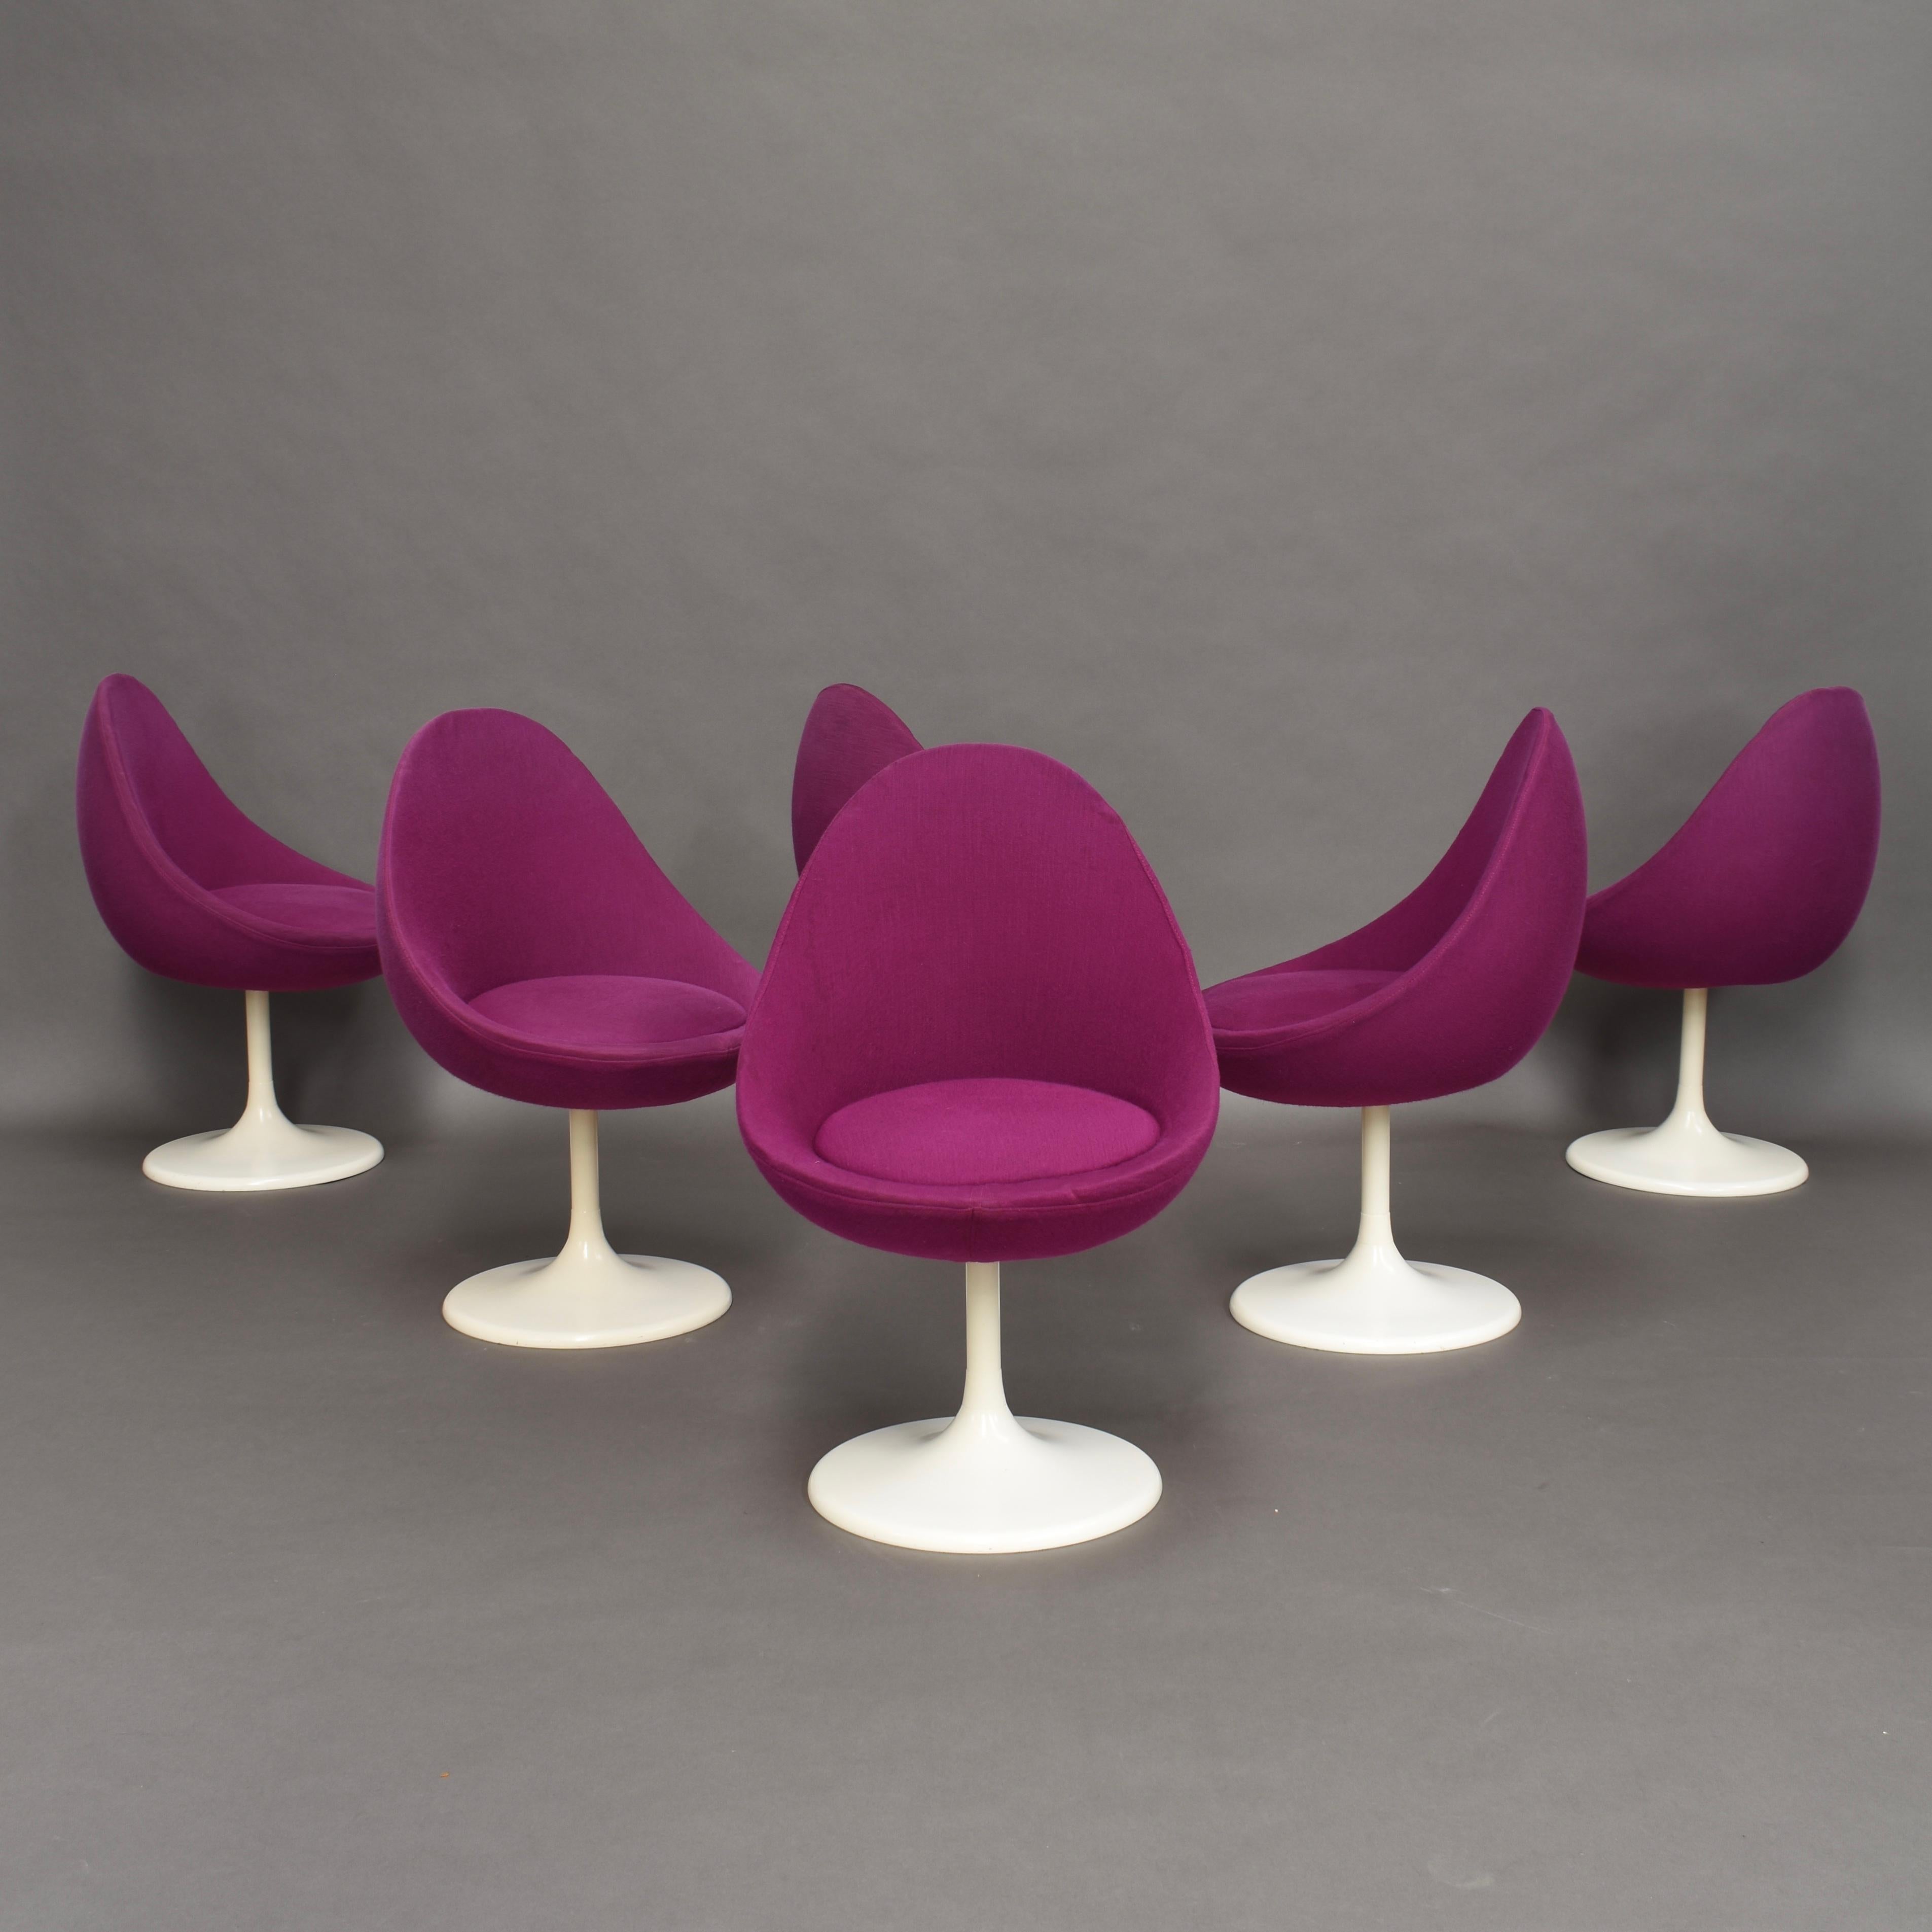 Rare set of six dining chairs attributed to Joe Colombo for Lusch Erzeugnis – Germany, circa 1970.

The chairs have a swivel function with a metal leg and a hardplastic foot. The ‘egg’ seat is made of polystyrene foam and is covered in a purple